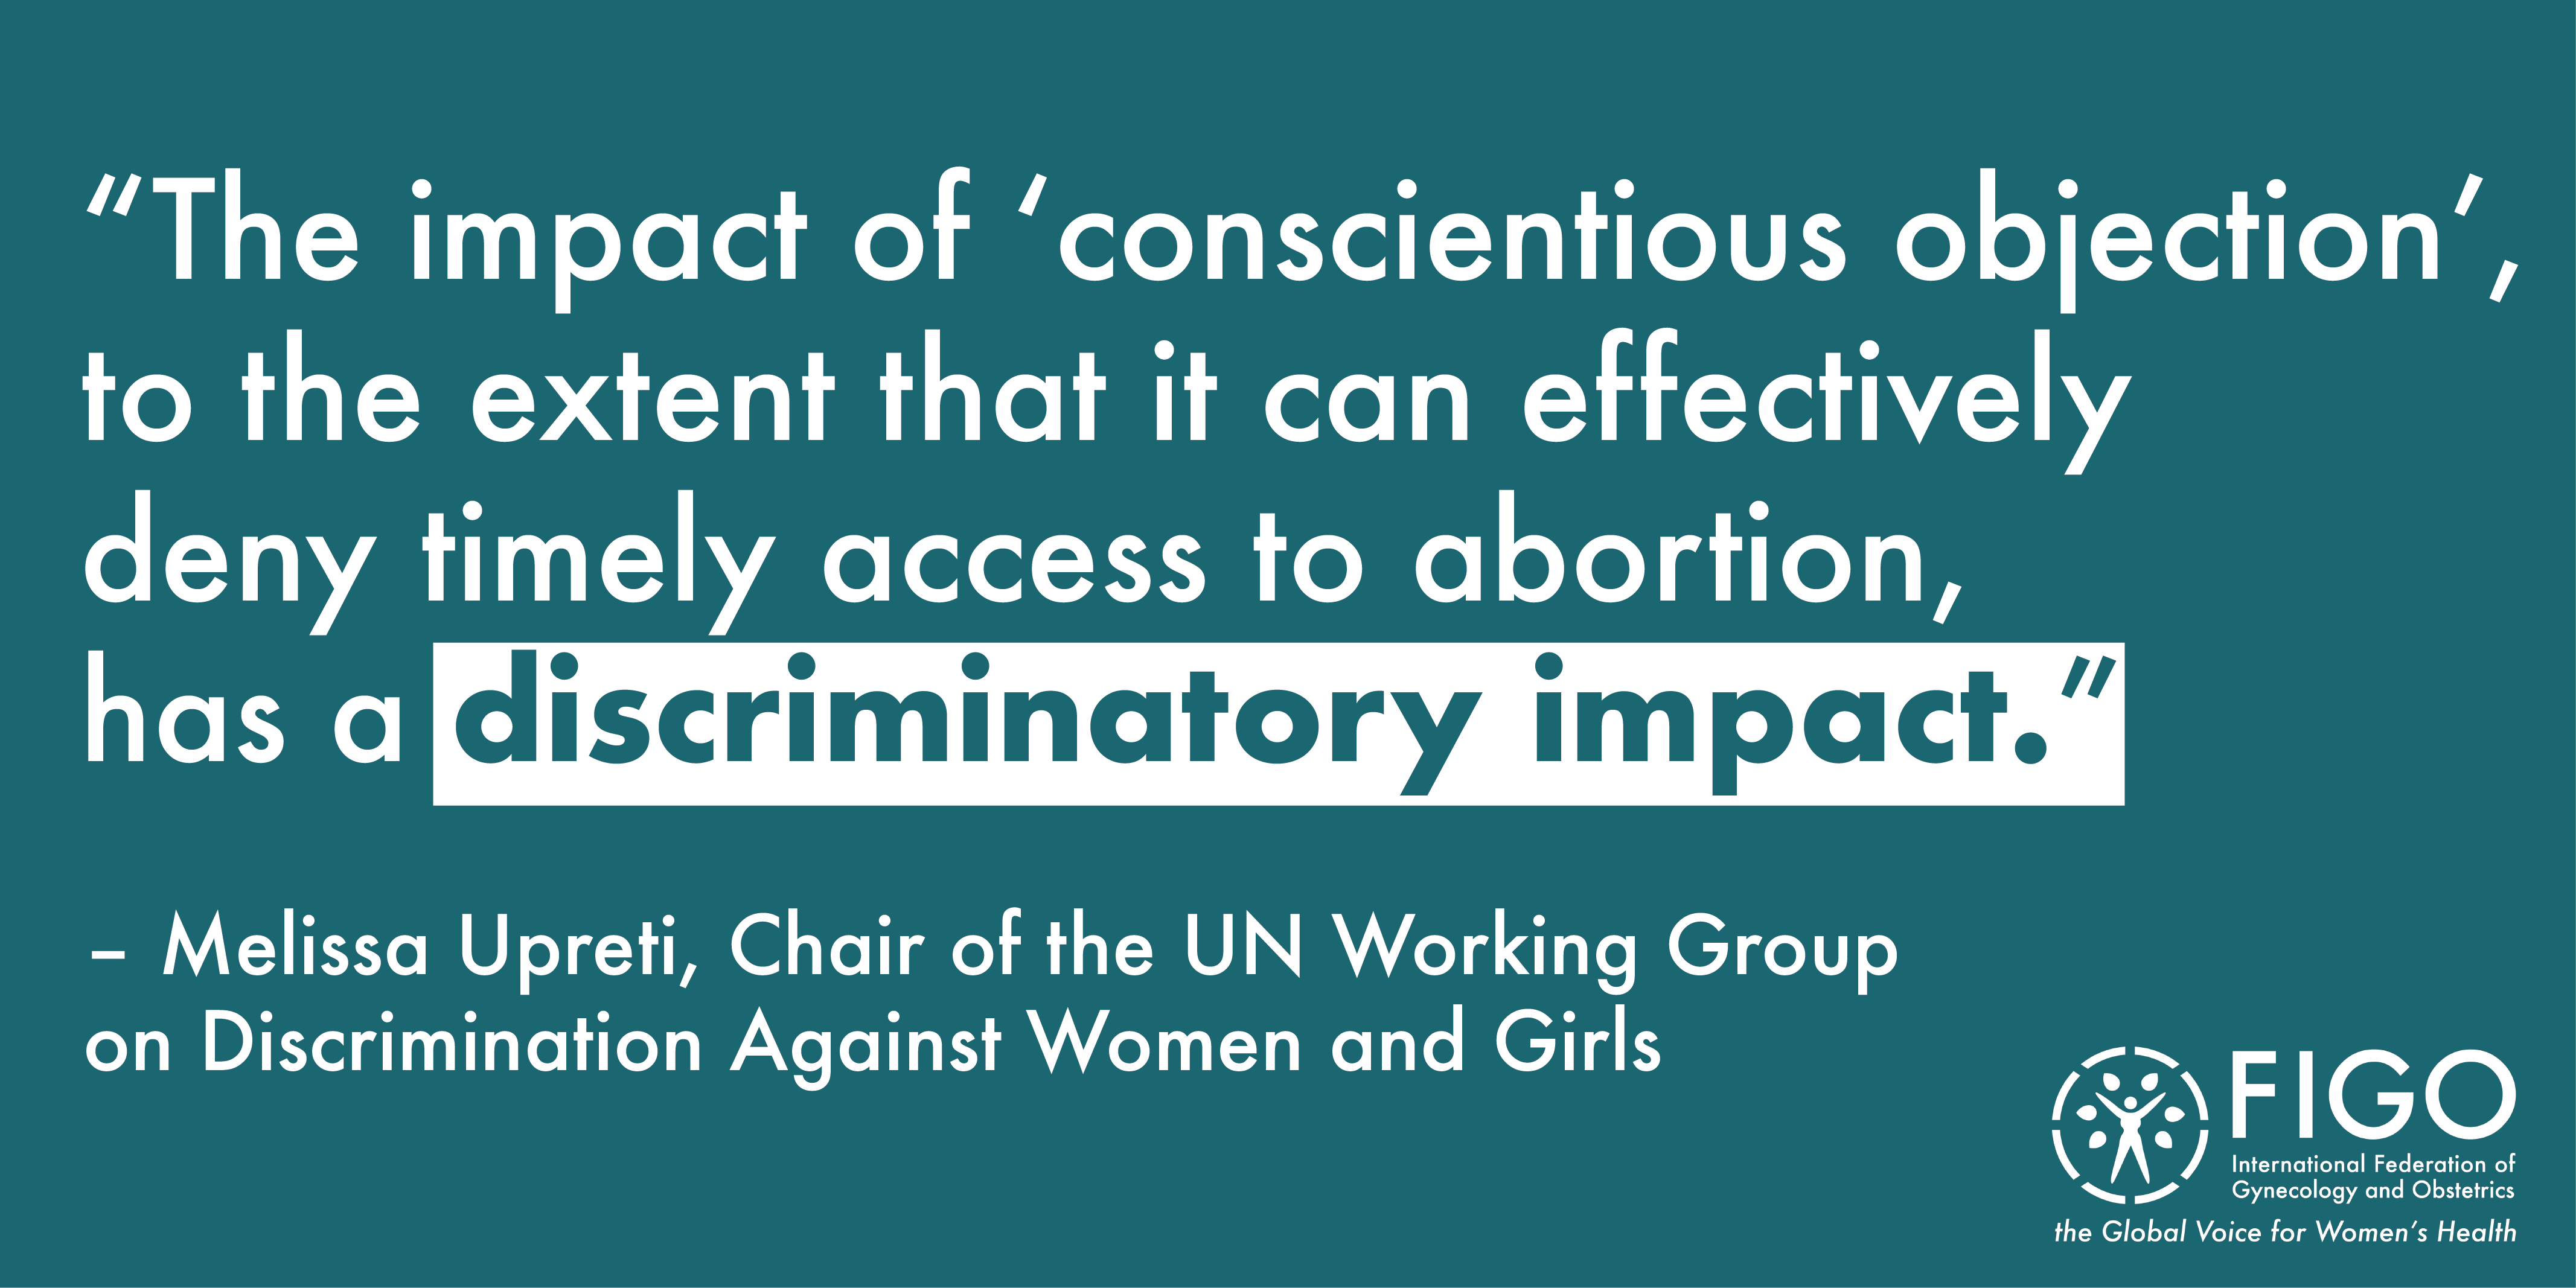 Melissa Upreti quote: The impact of ‘conscientious objection’,  to the extent that it can effectively  deny timely access to abortion,  has a discriminatory impact.